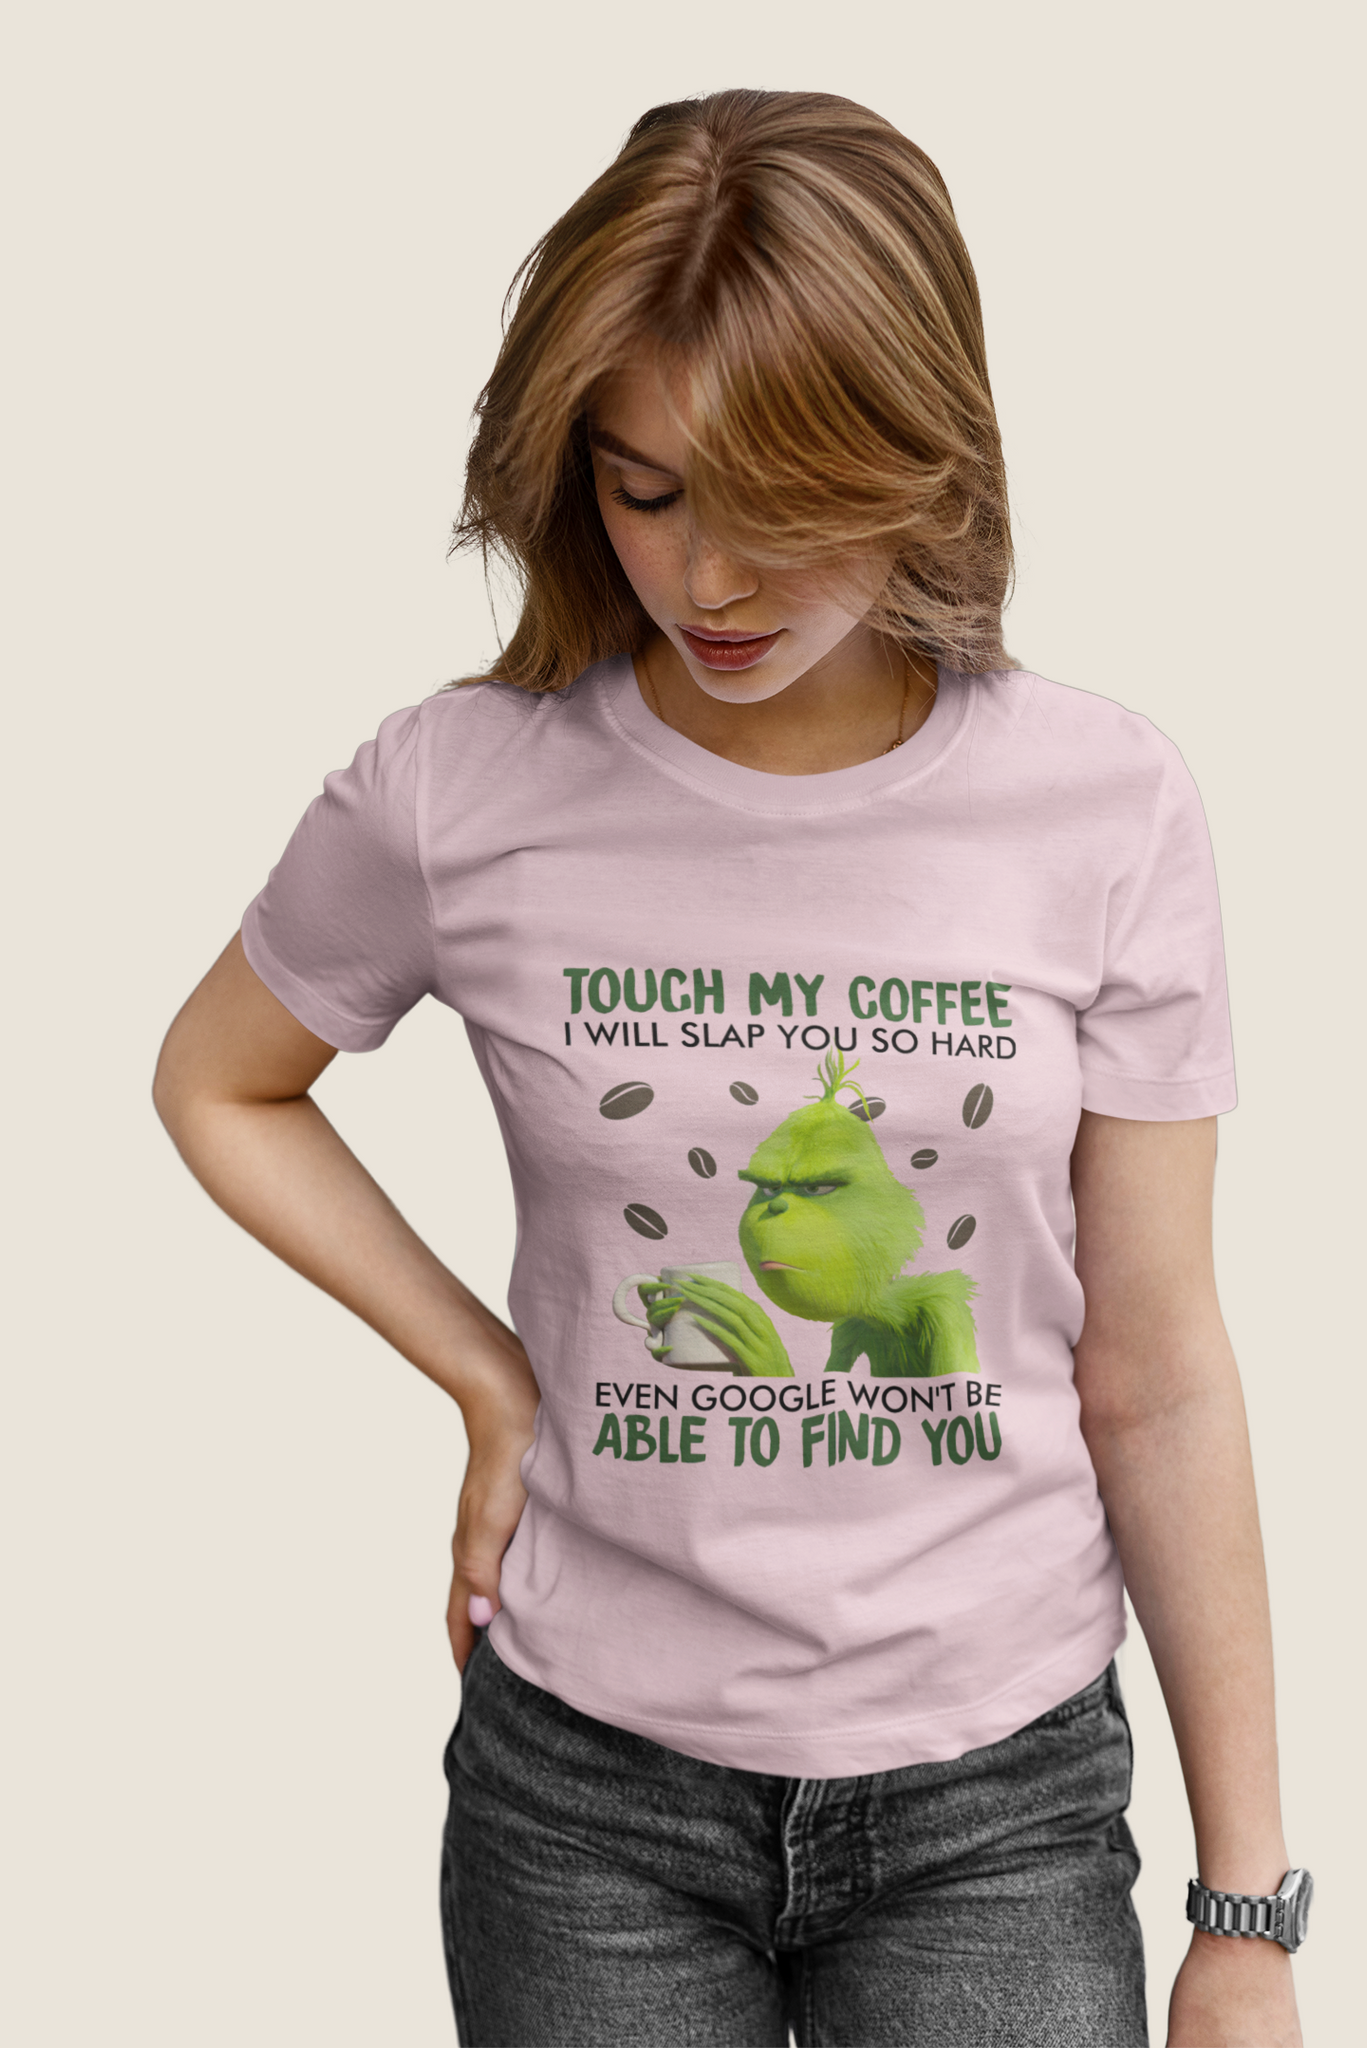 Grinch T Shirt, Touch My Coffee I Will Slap You So Hard Tshirt, Even Google Wont Be Able To Find You Shirt, Christmas Gifts